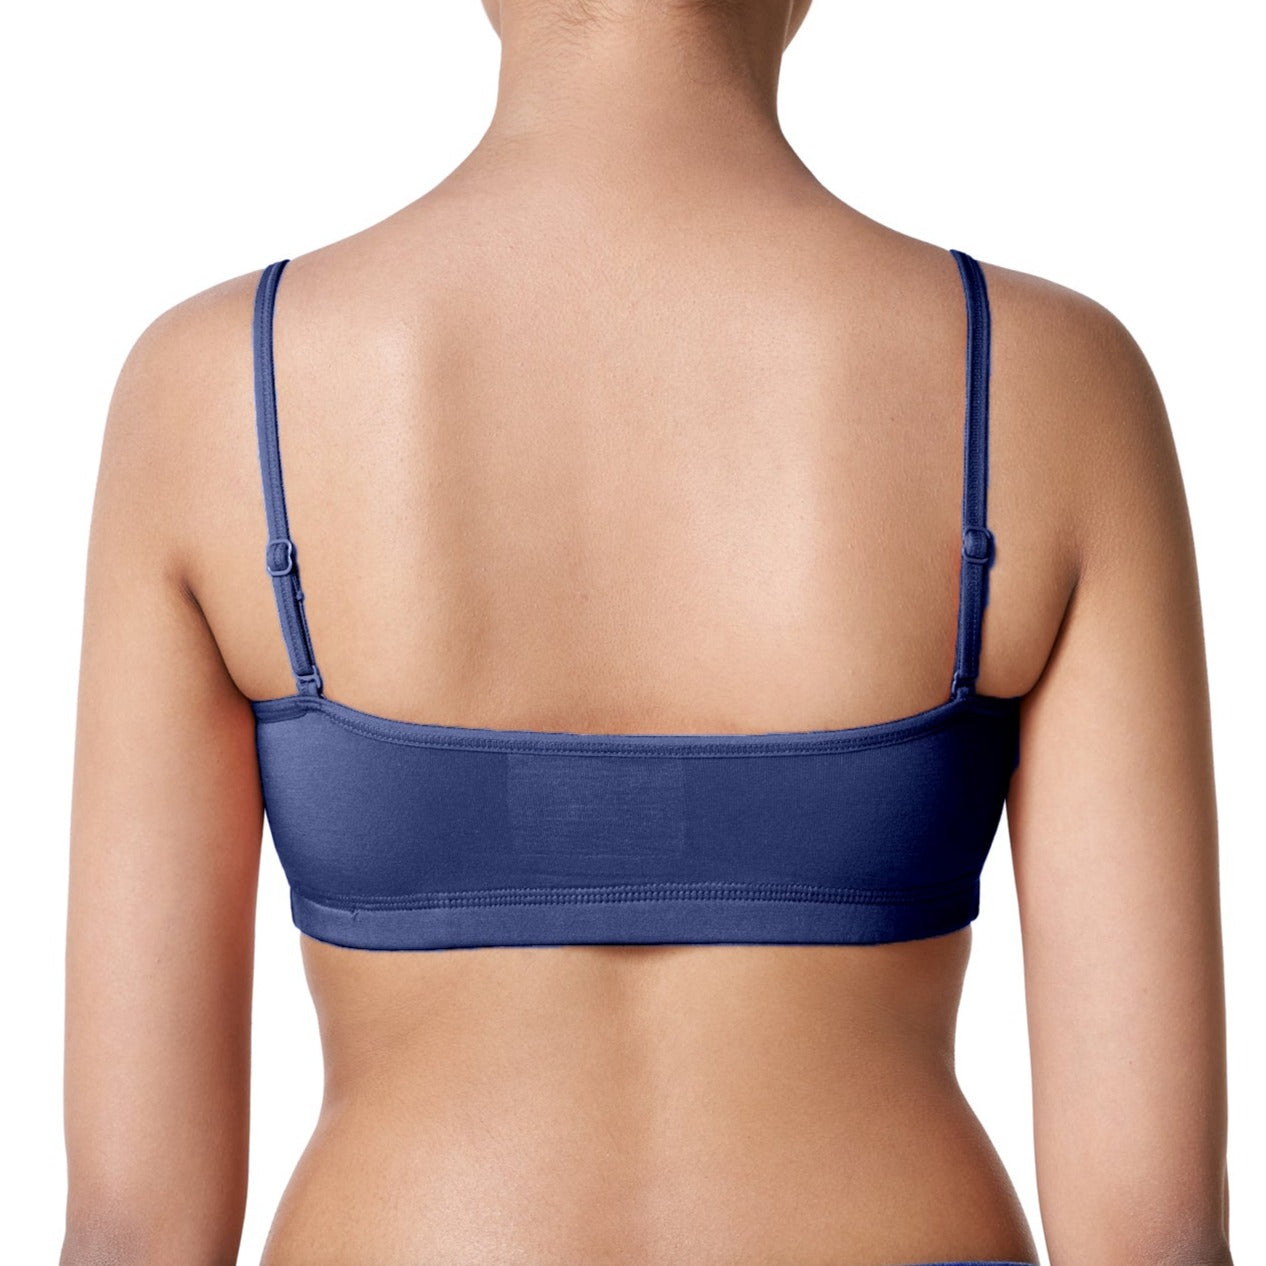 blossom-starters bra-navy blue4-teen collection